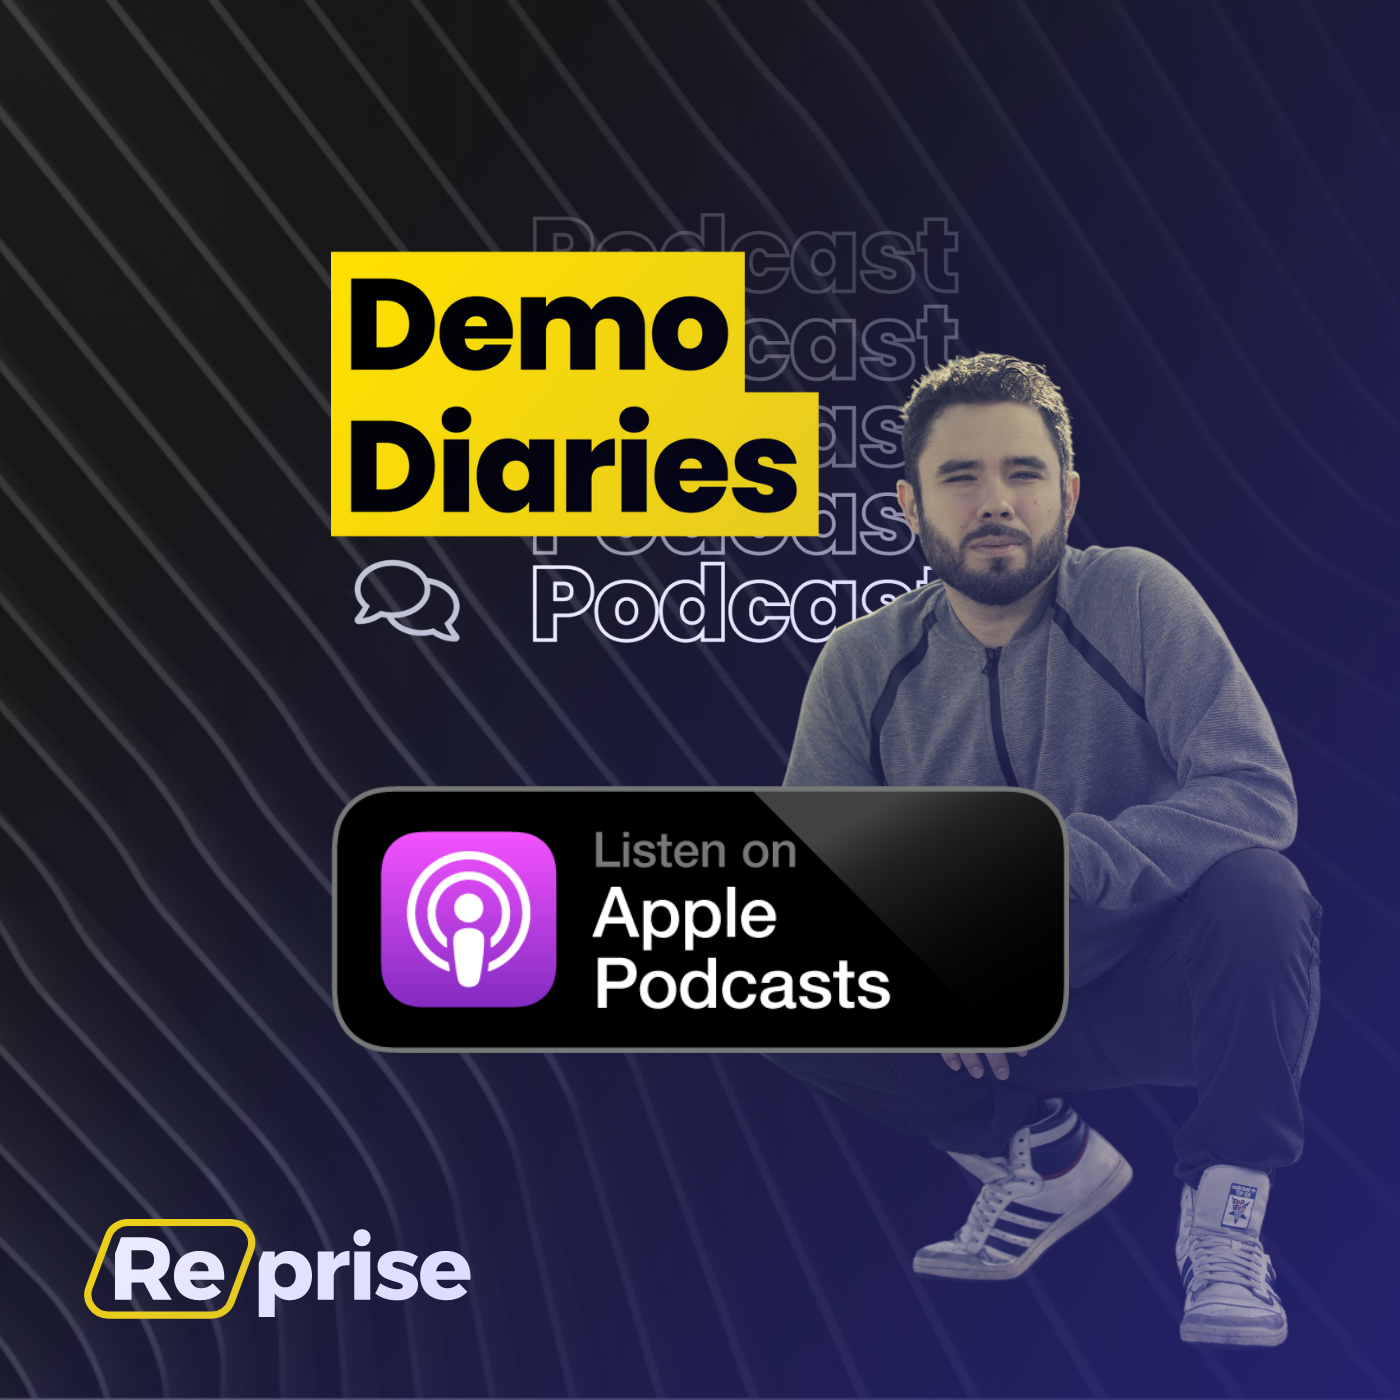 Demo Diaries Now Available on Apple Podcasts!